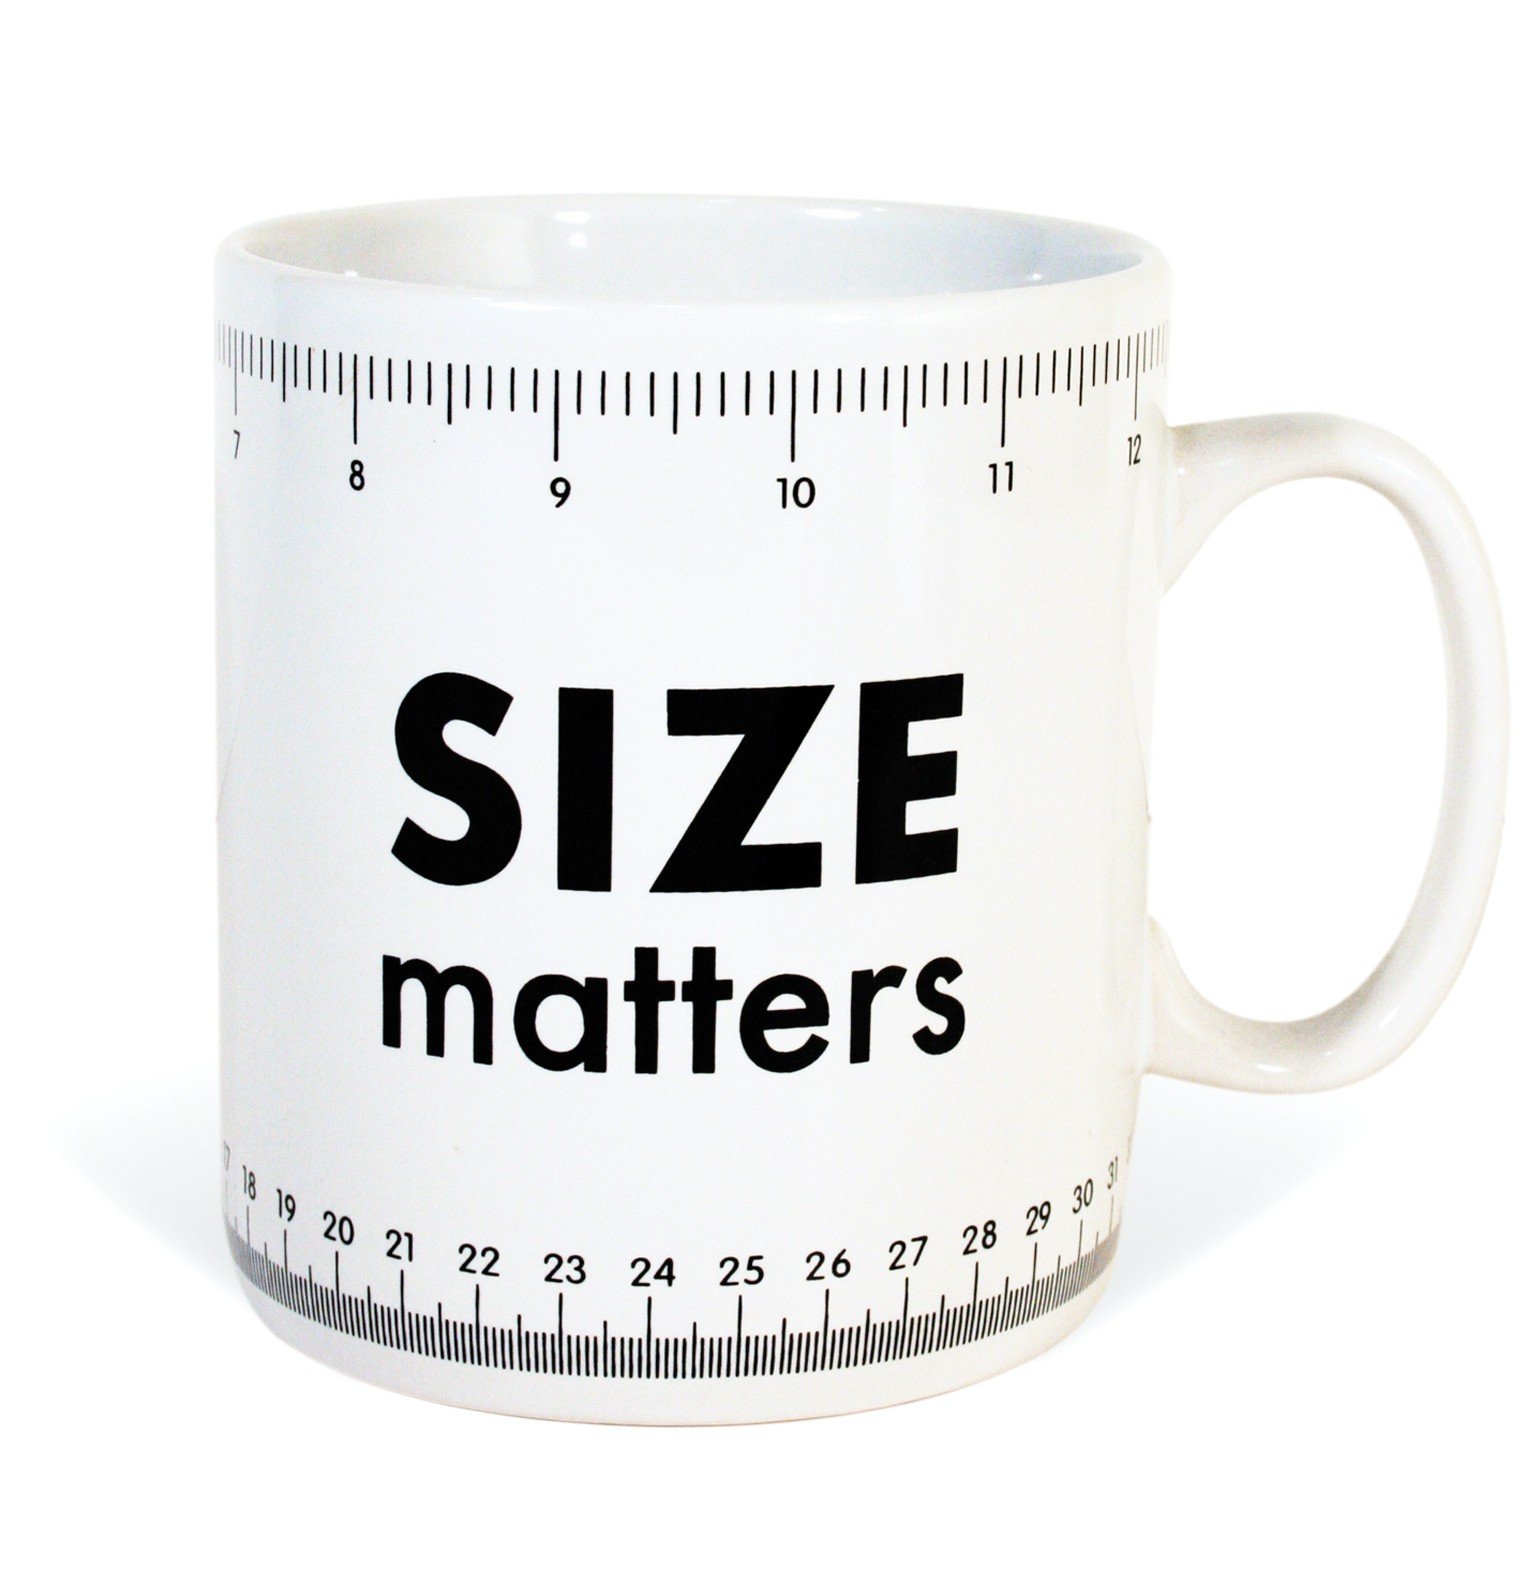 HMO room sizes - Does size really matter?